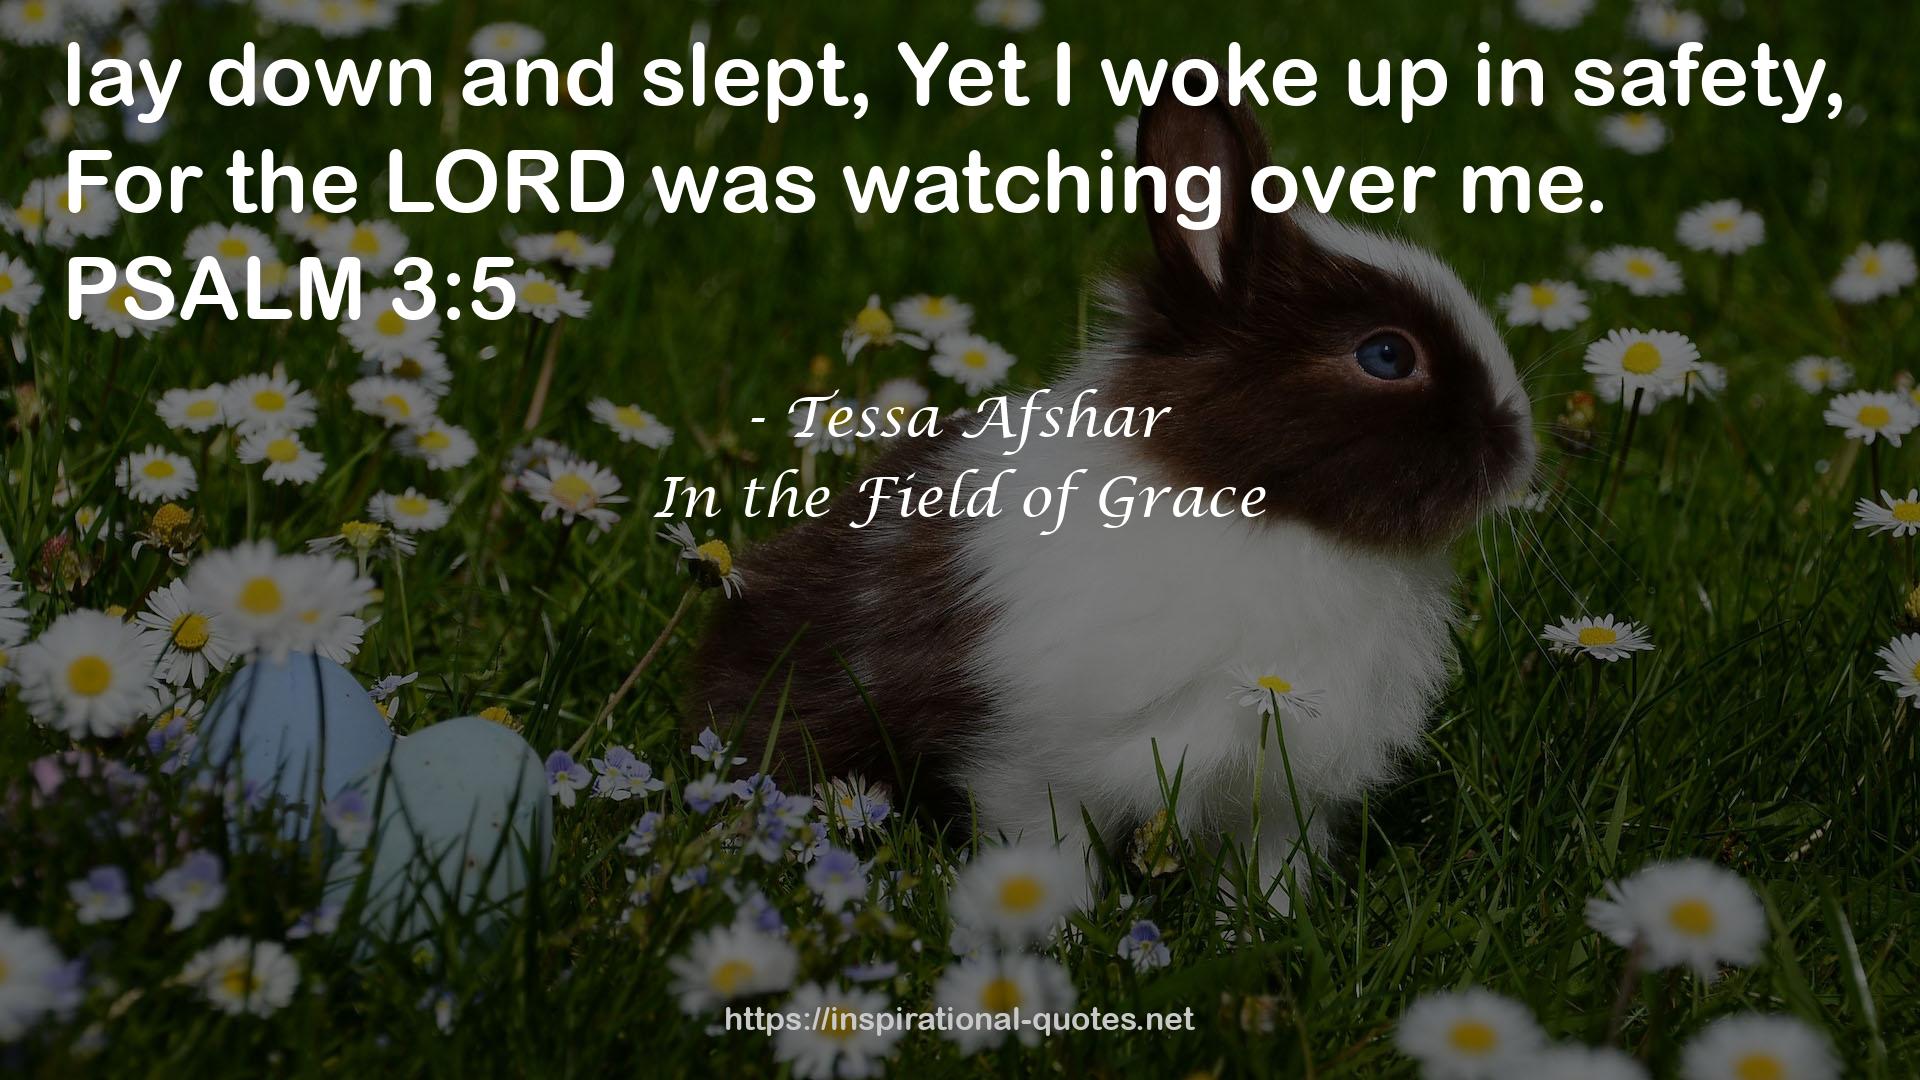 In the Field of Grace QUOTES